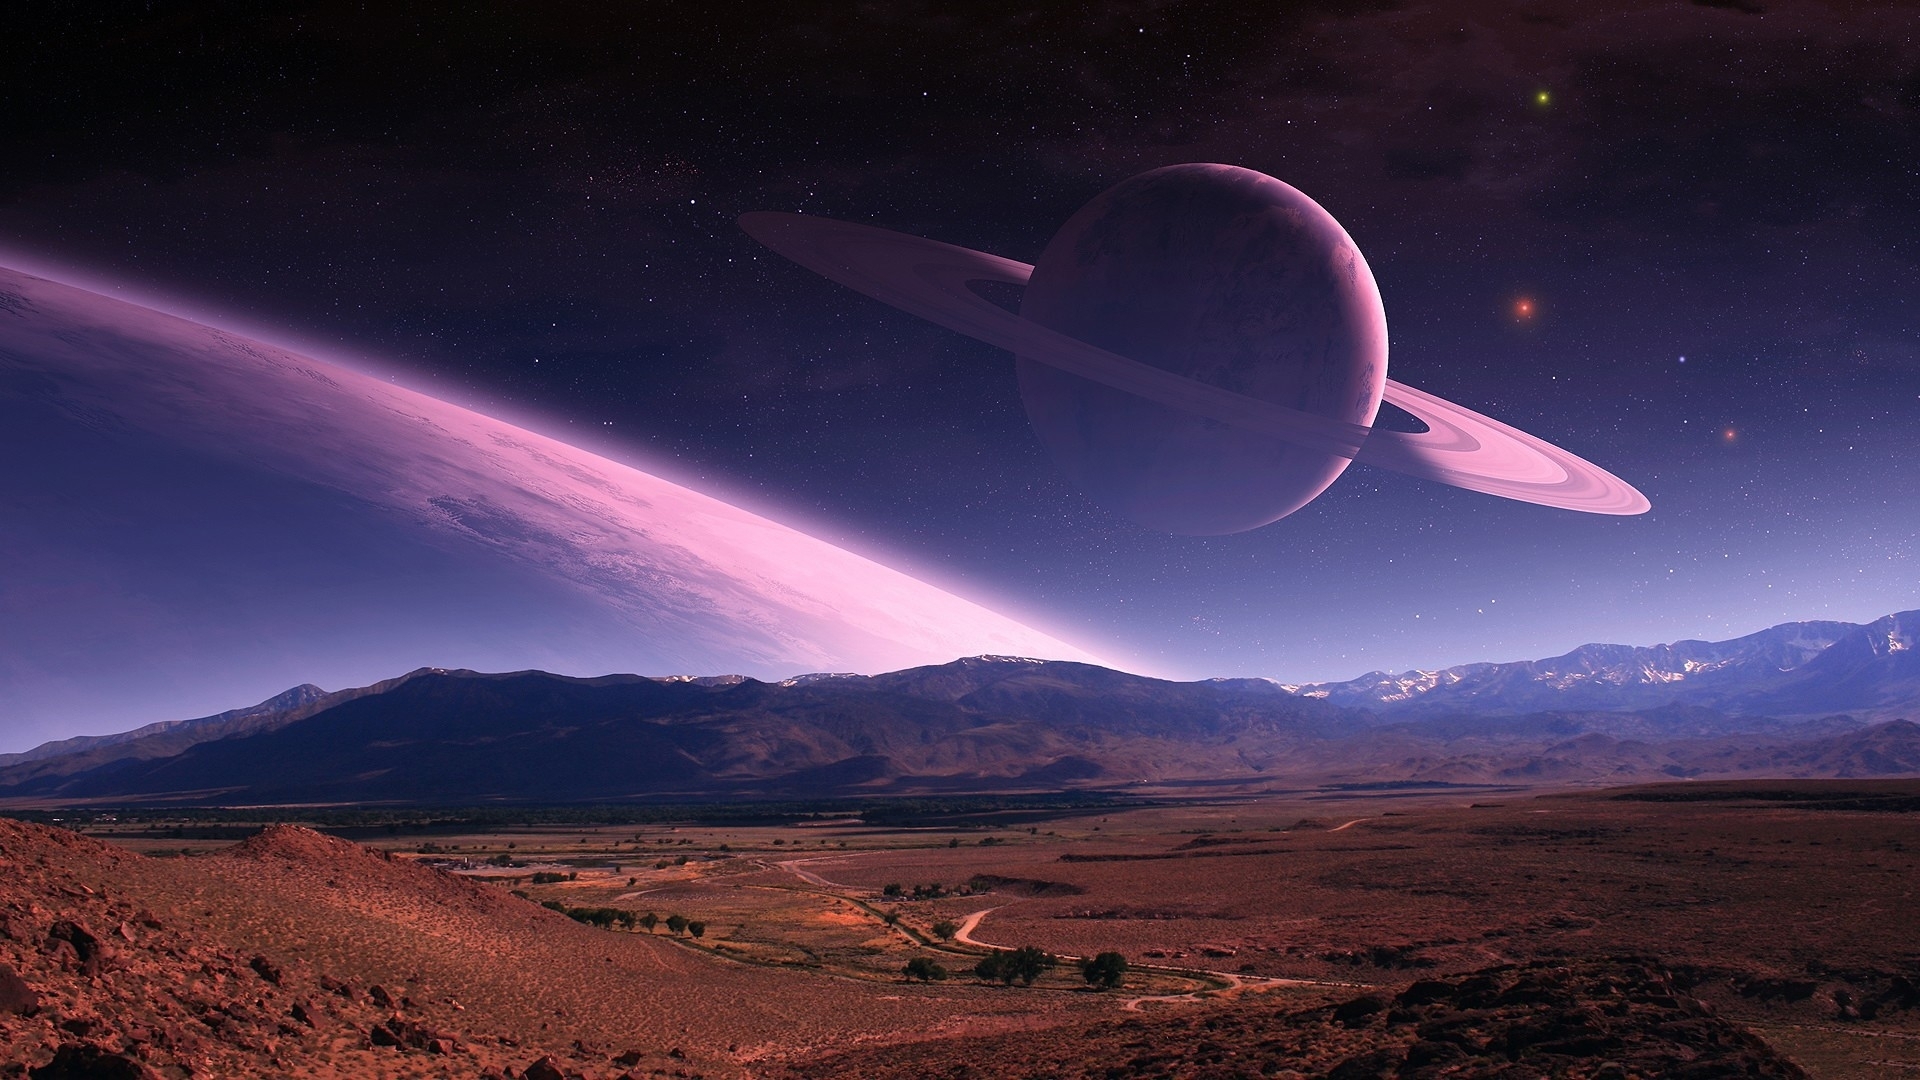 Planet Wallpapers Best Wallpapers